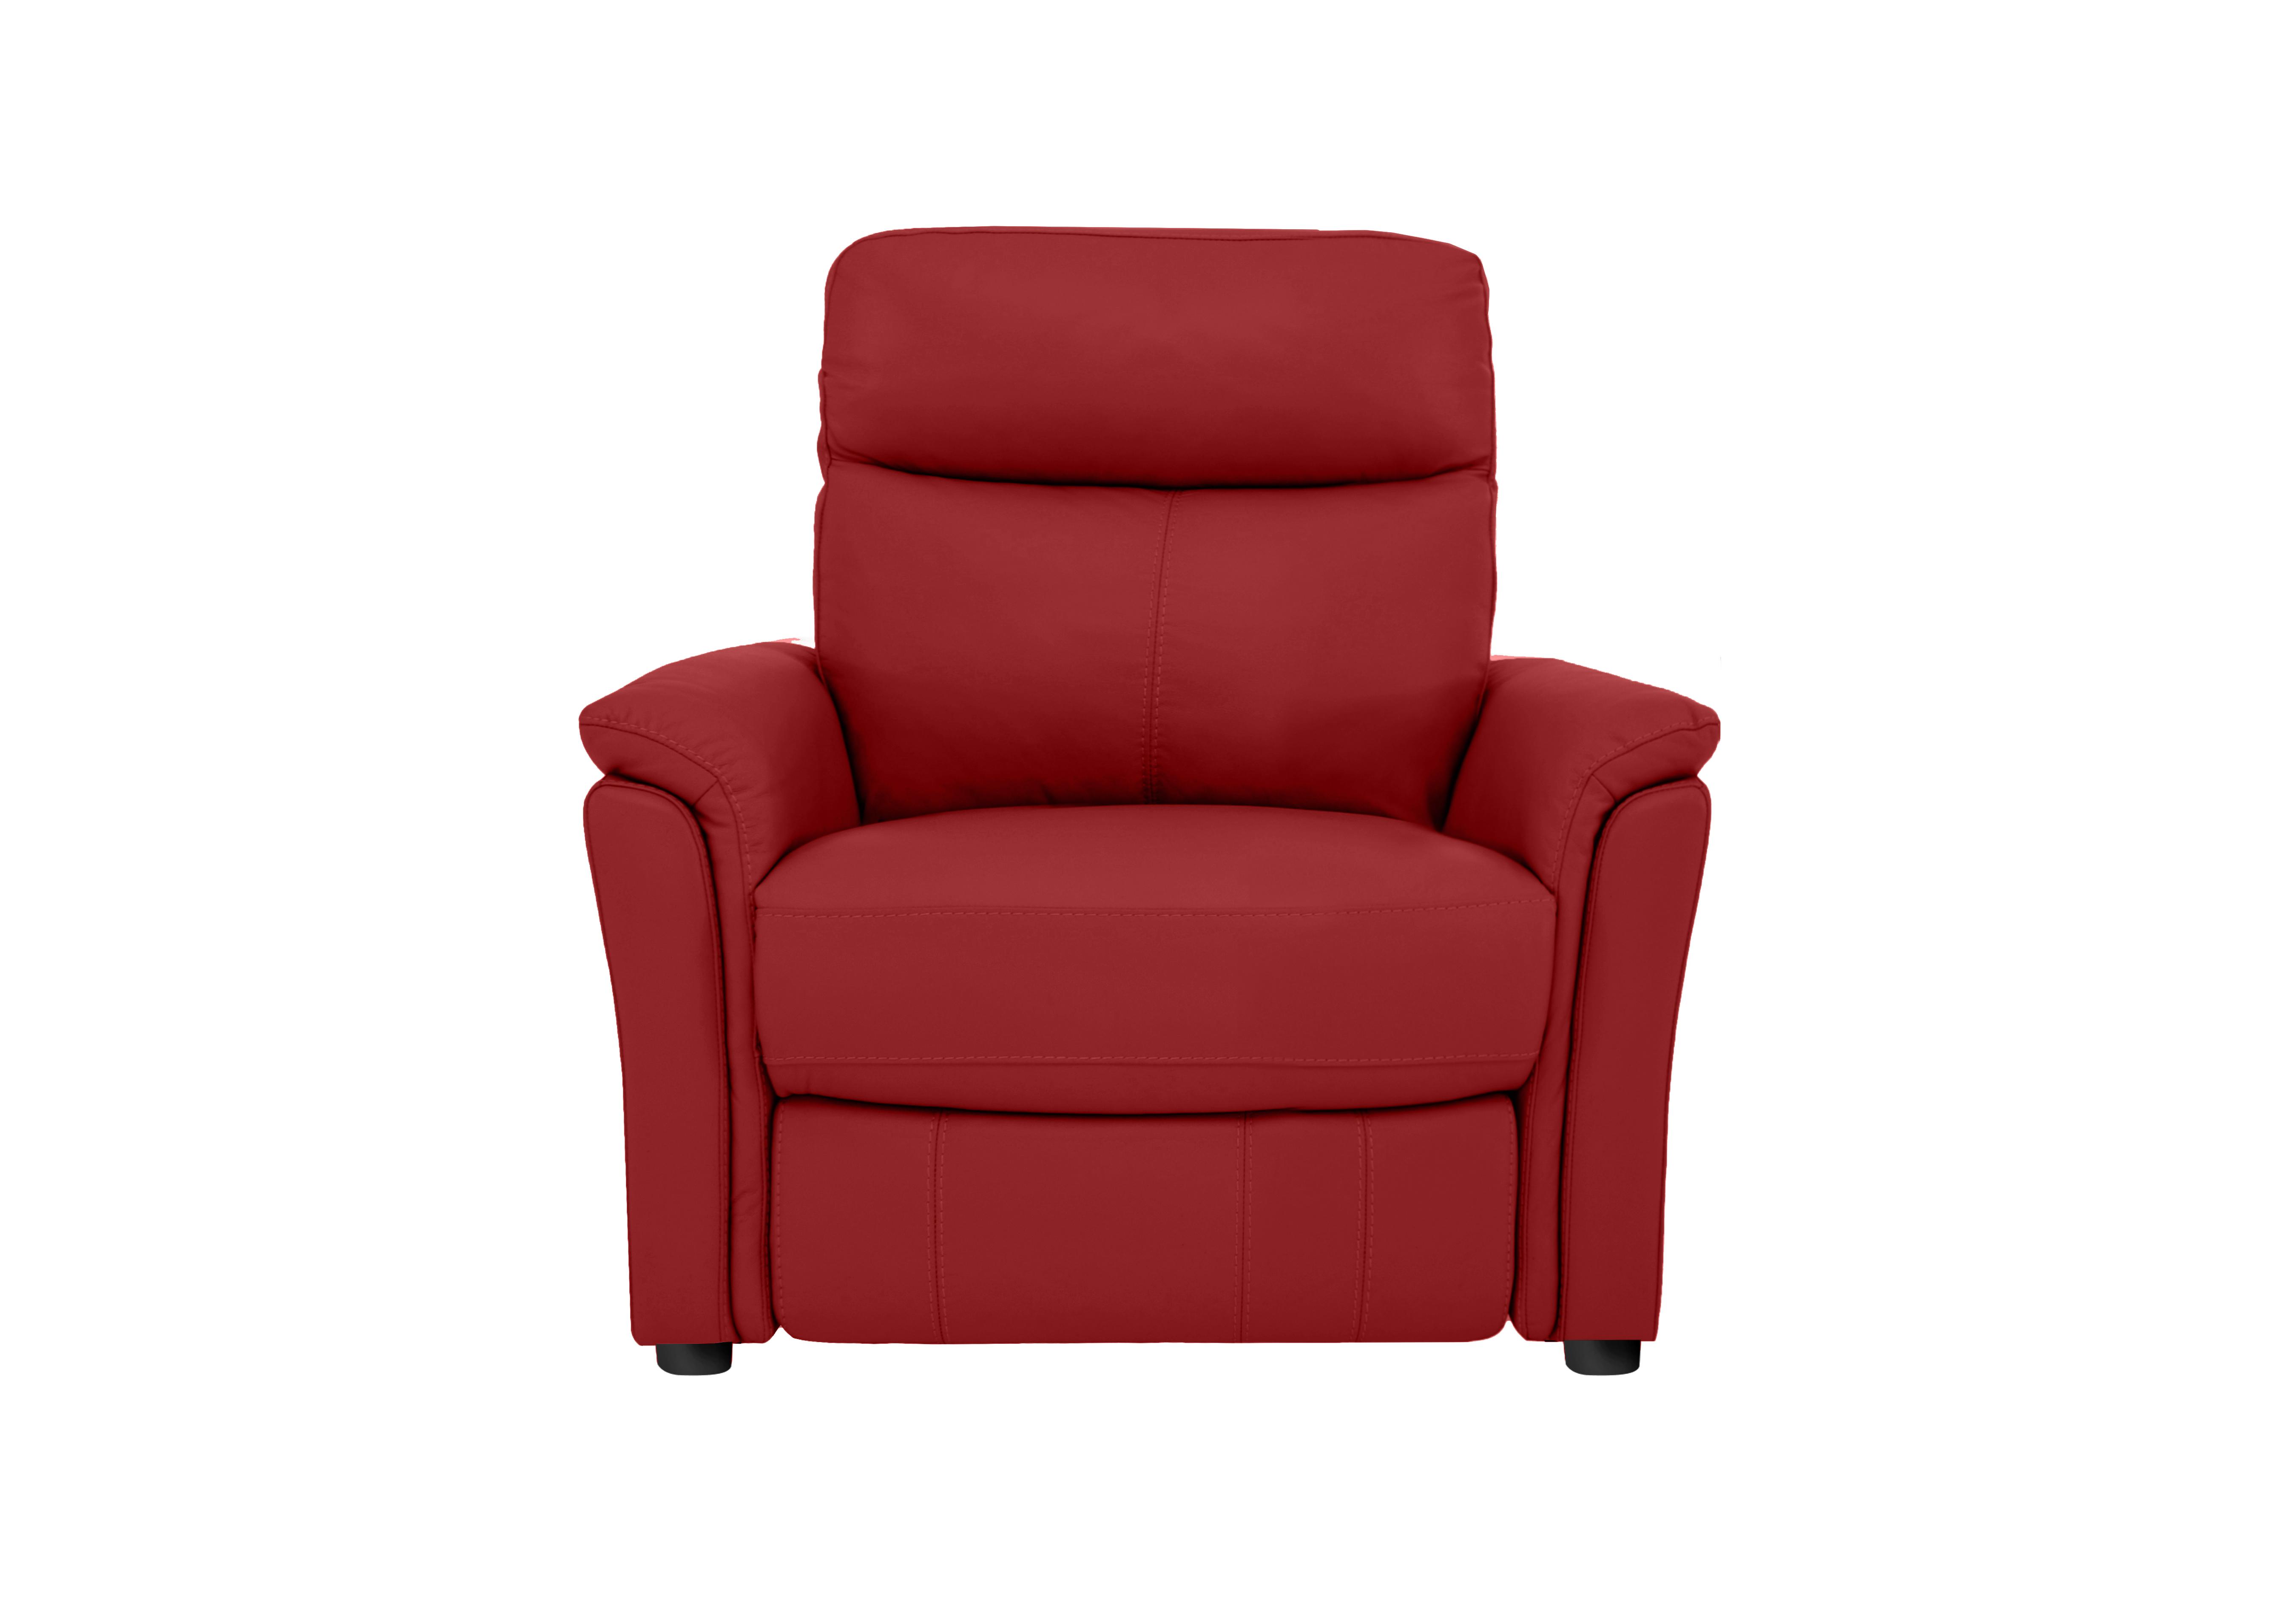 Compact Collection Piccolo Leather Static Armchair in Bv-0008 Pure Red on Furniture Village